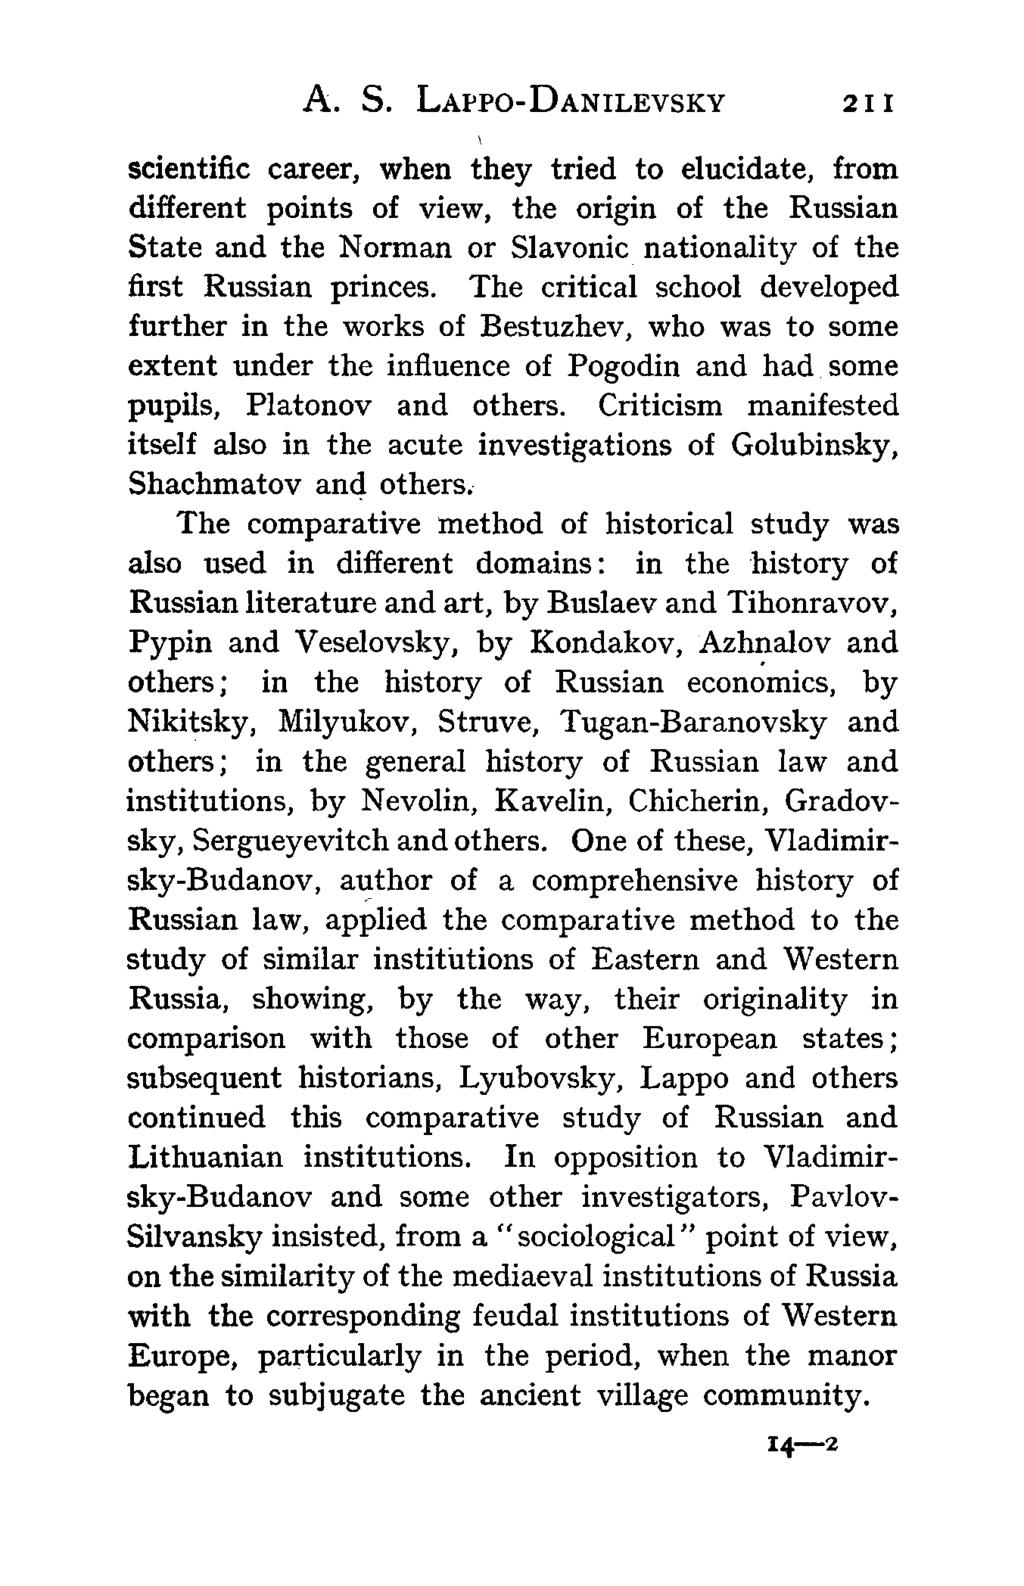 A. S. LAPPO-DANILEVSKY 211 scientific career, when they tried to elucidate, from different points of view, the origin of the Russian State and the Norman or Slavonic nationality of the first Russian